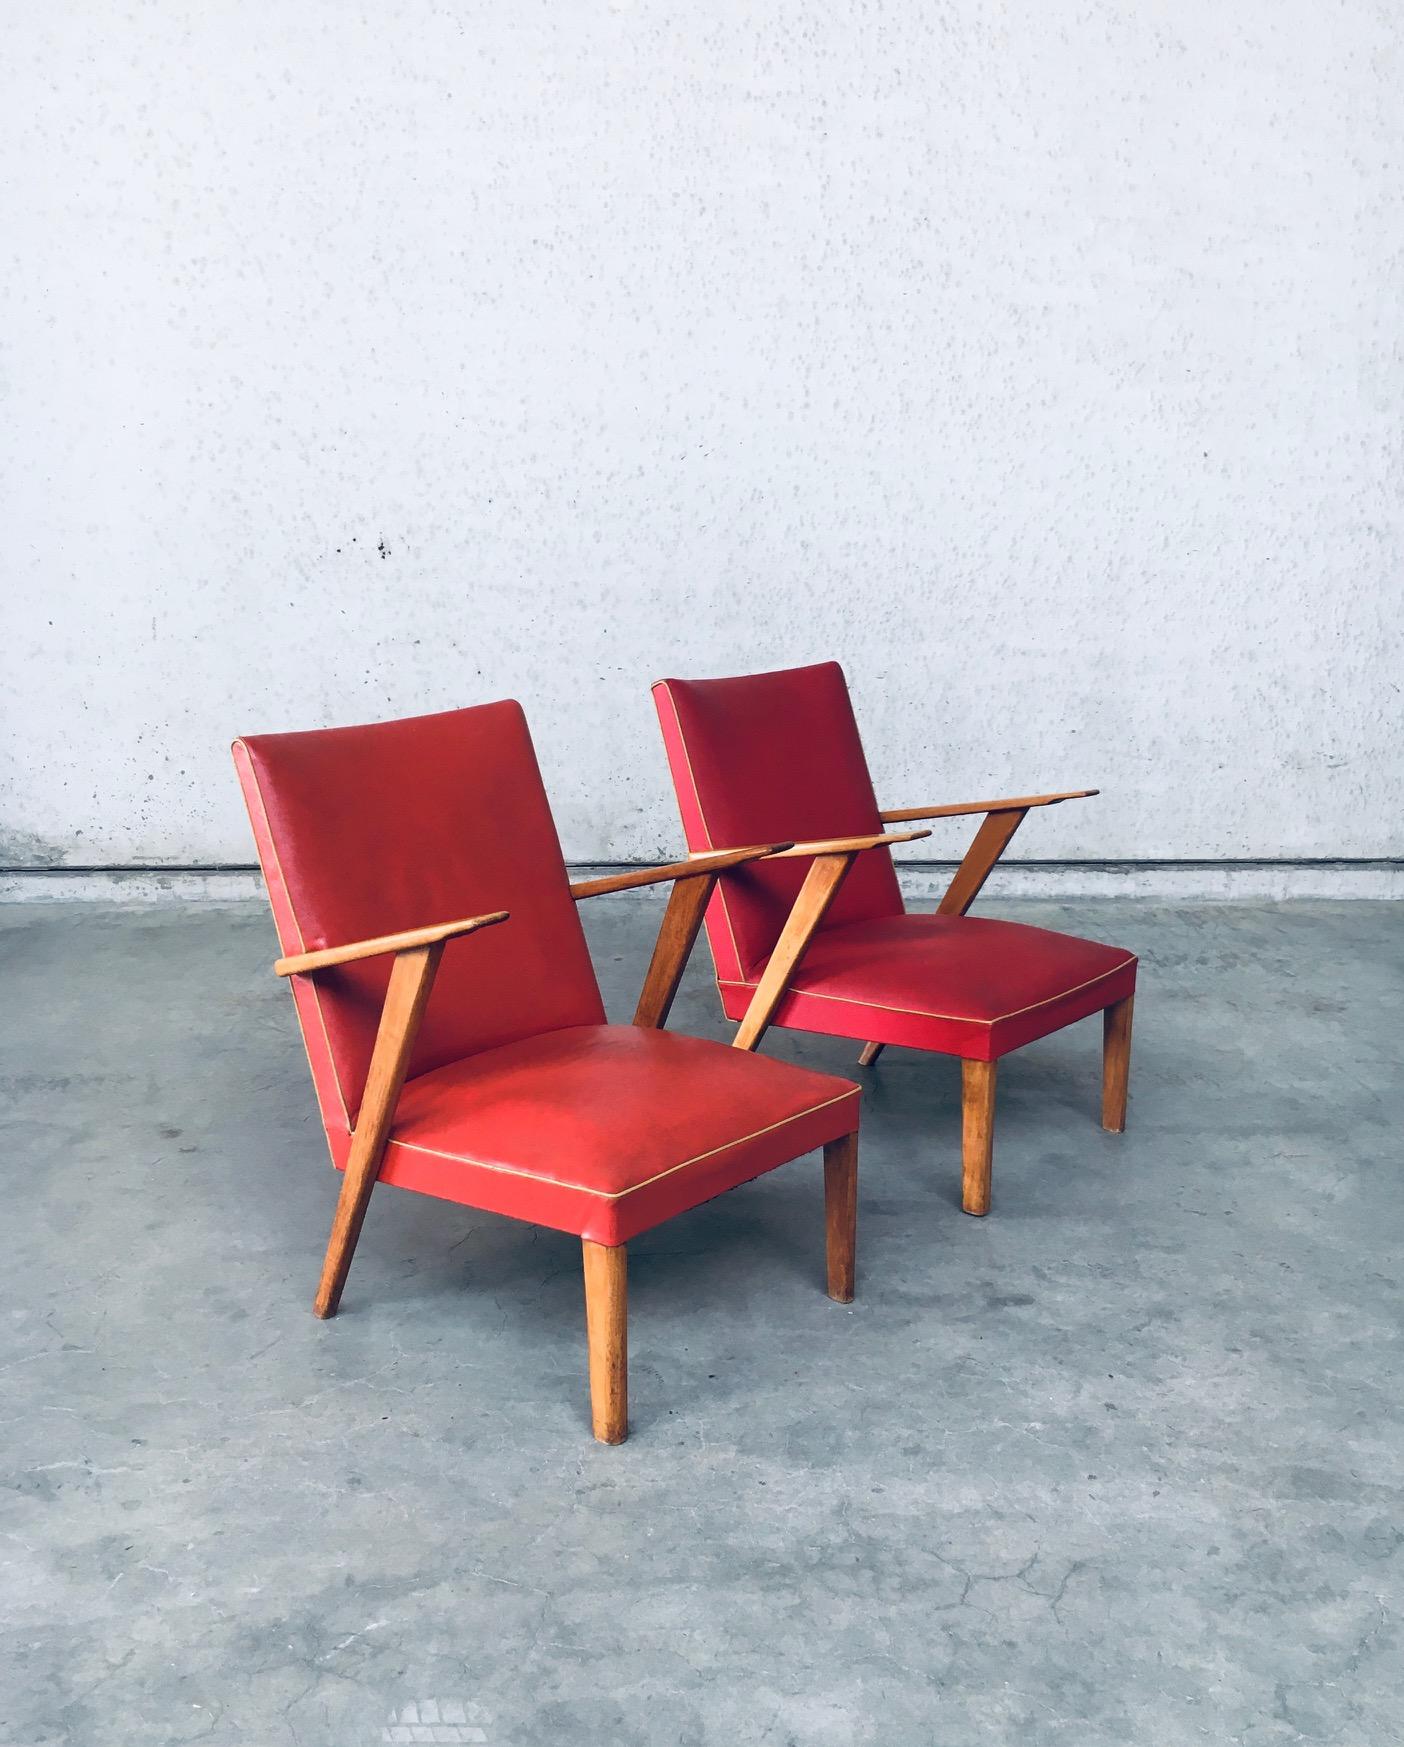 Vintage Midcentury Modern Dutch Design Lounge Chair set. Made in the Netherlands, 1950's. Faux leather, two different colors red skai with beech armrests and legs. The armchairs are similar, but differ slightly. The red skai fabric is different on